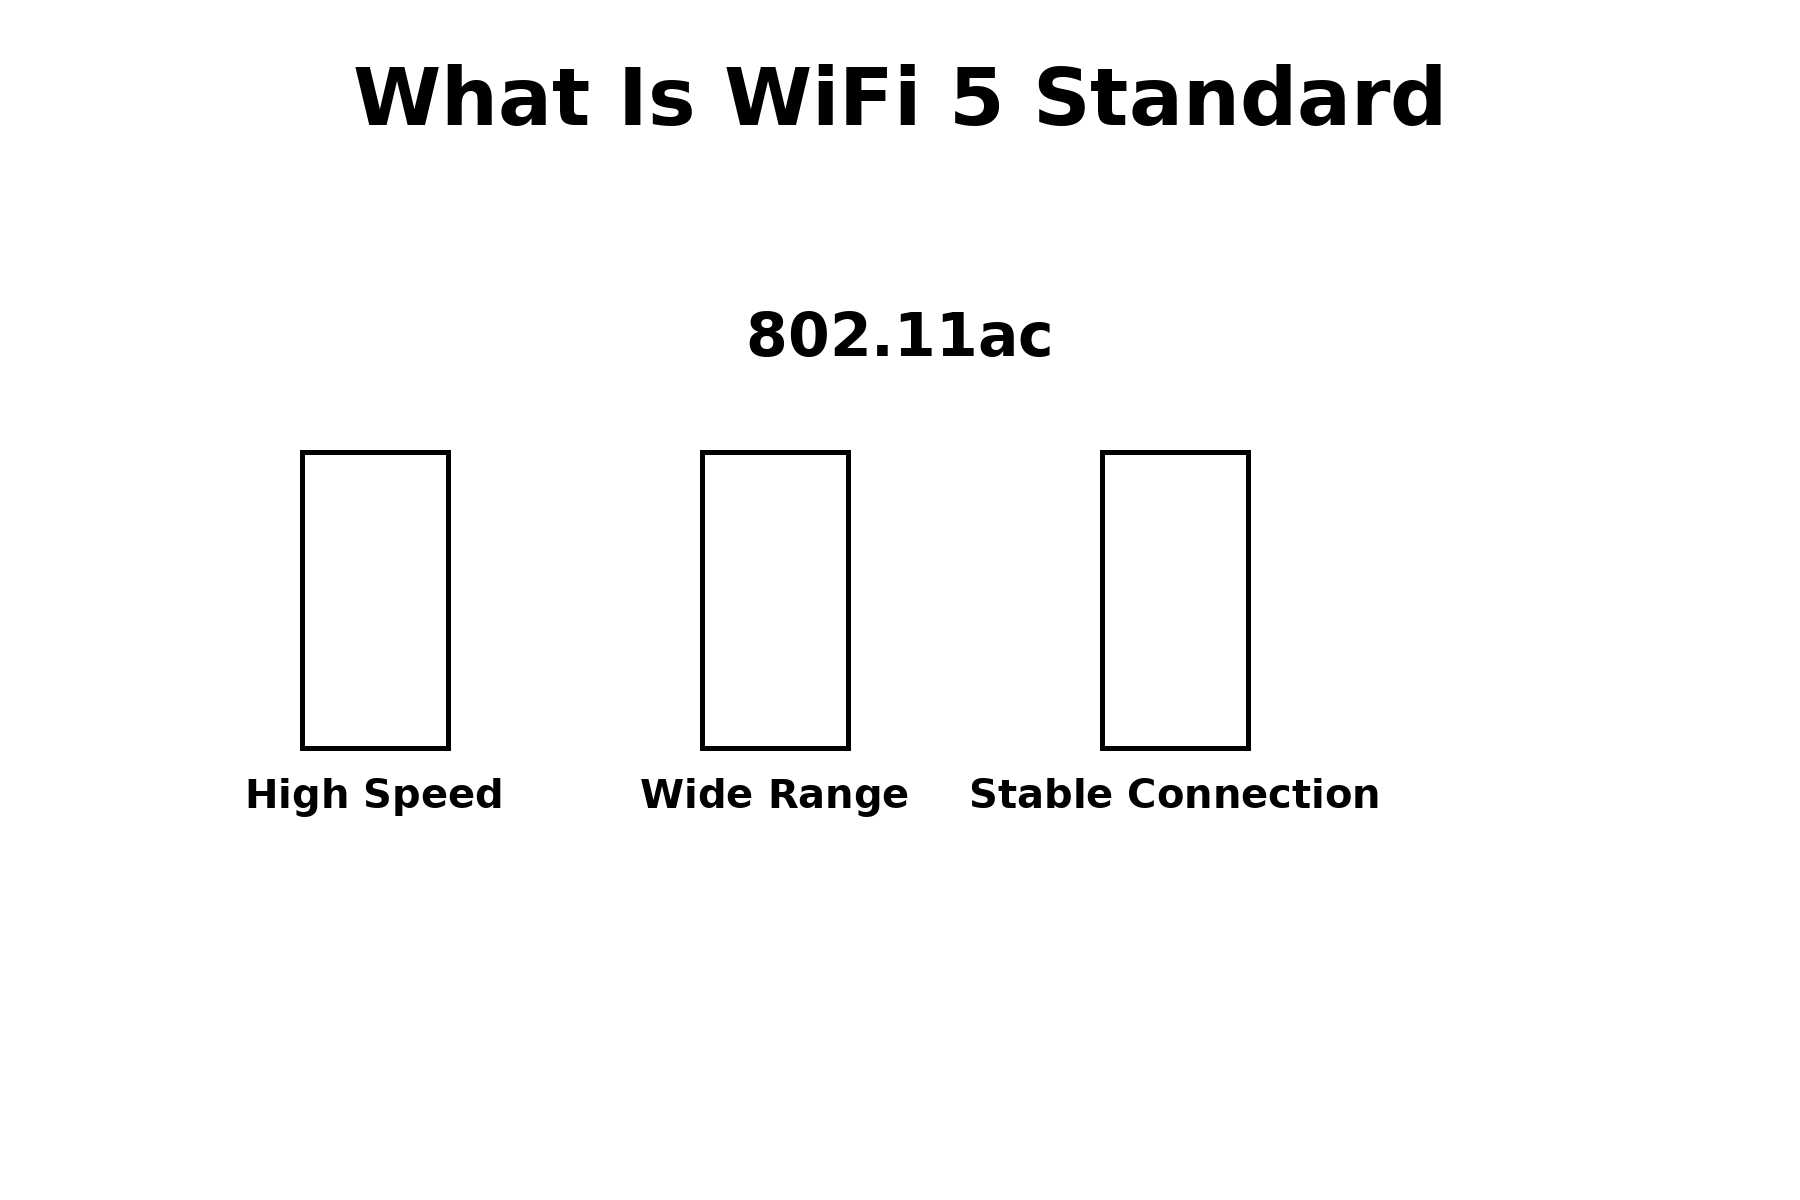 What is WiFi 5